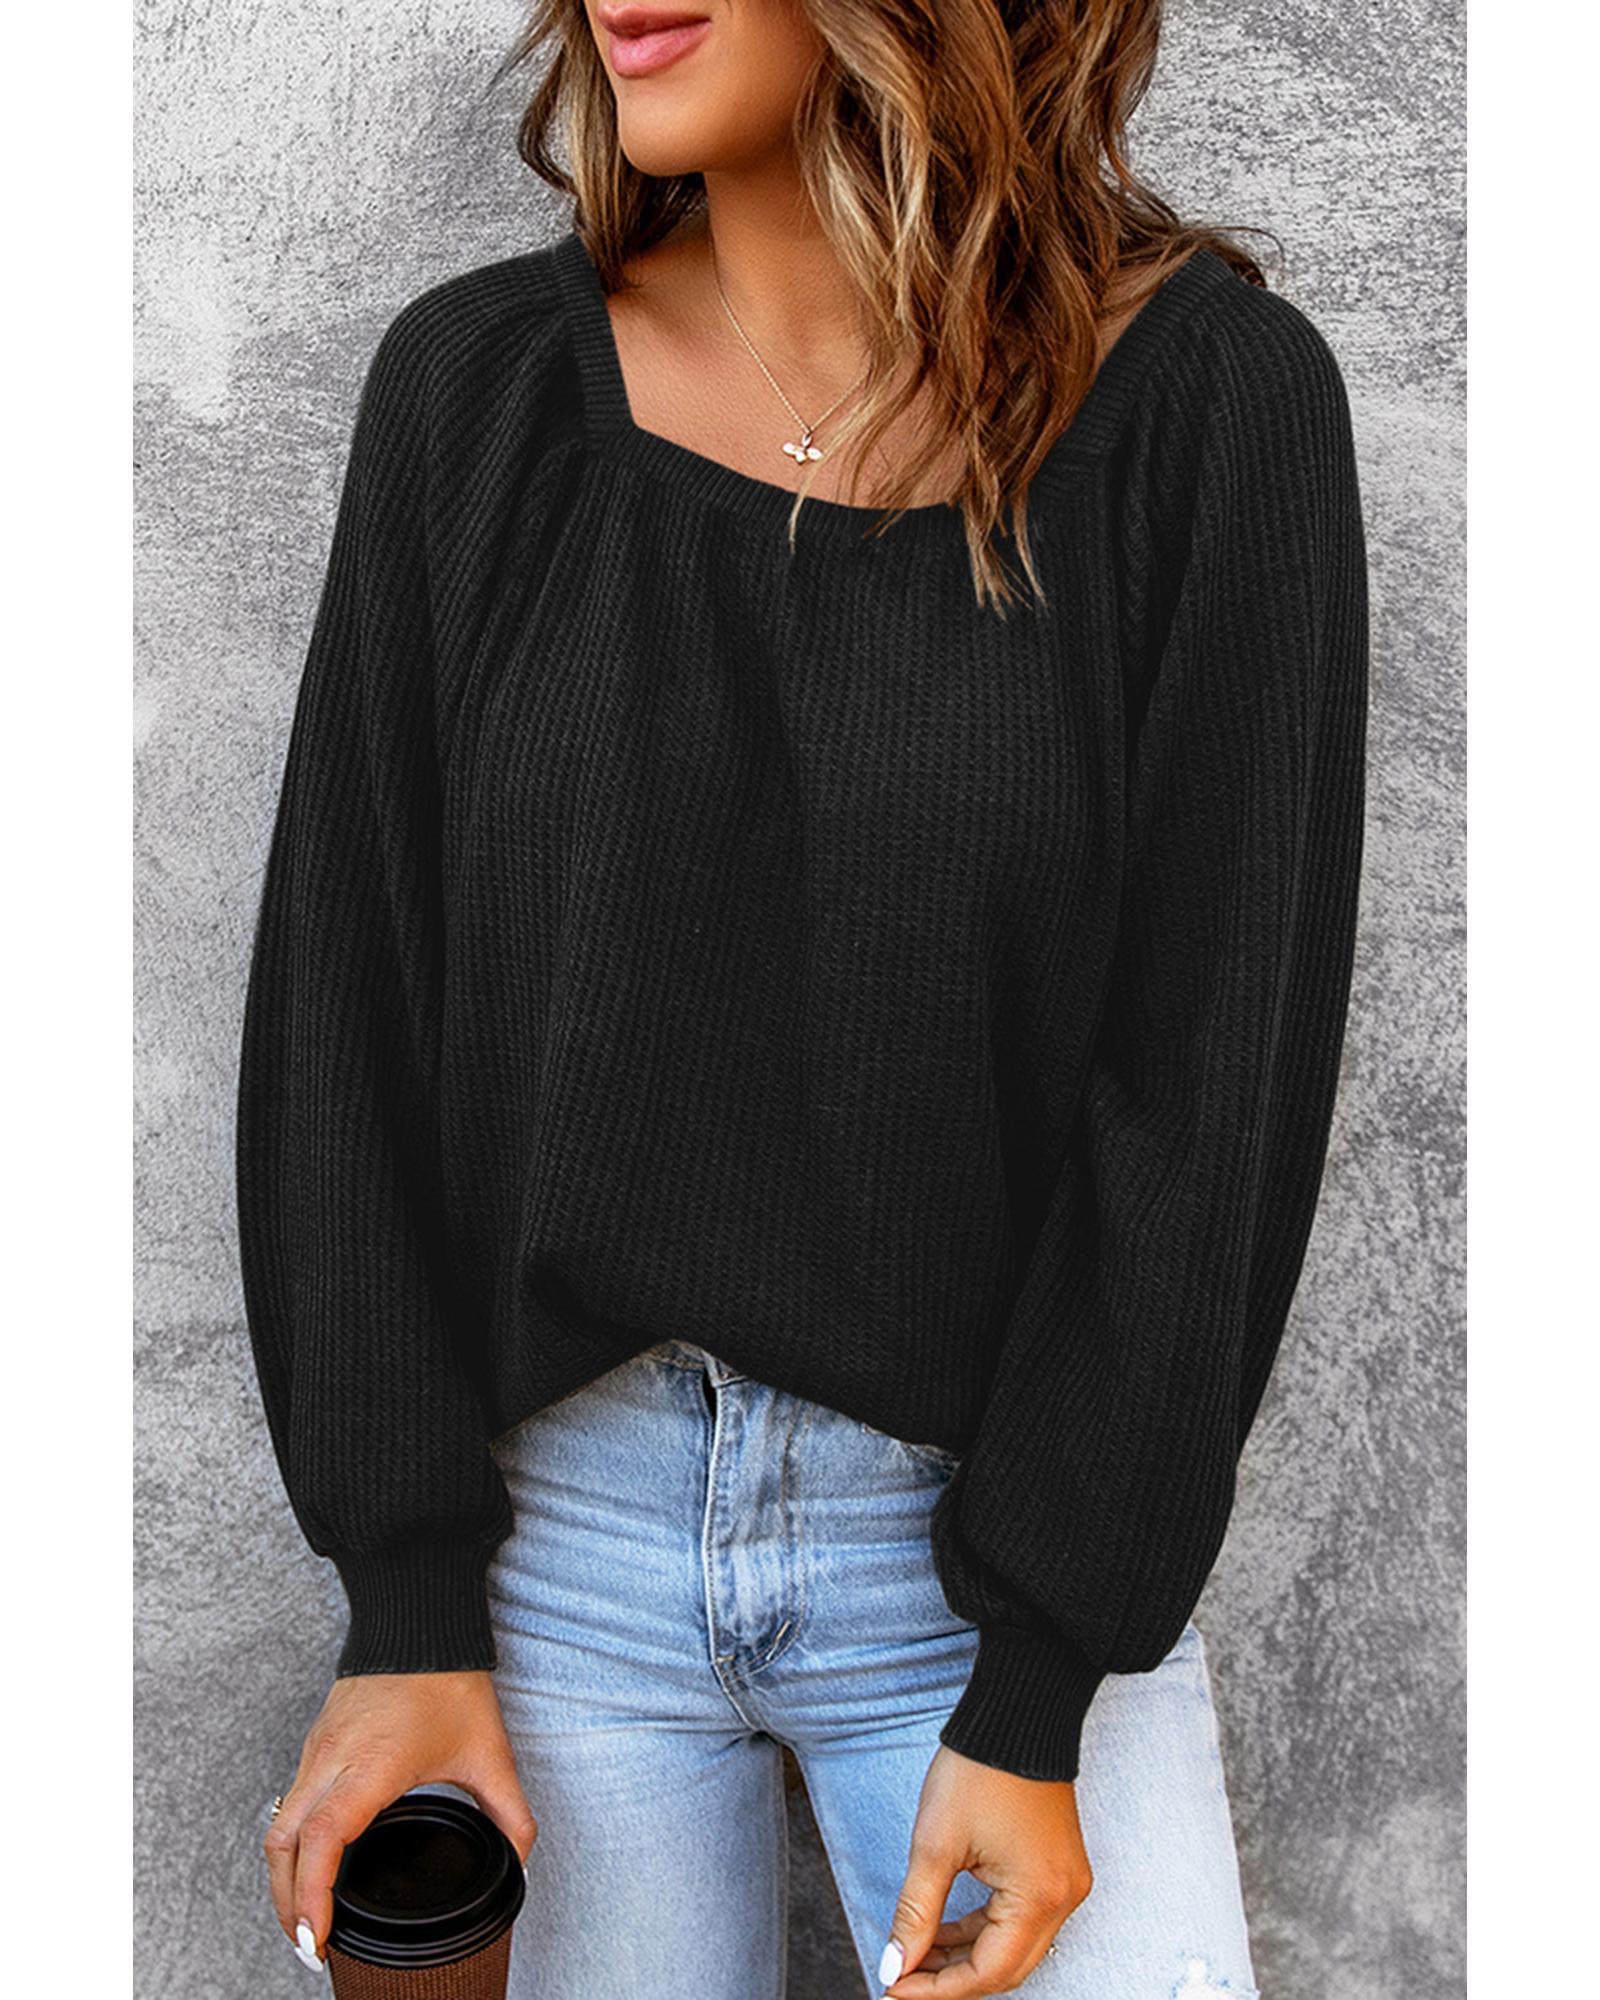 Puff Sleeve Waffle Knit Top - S